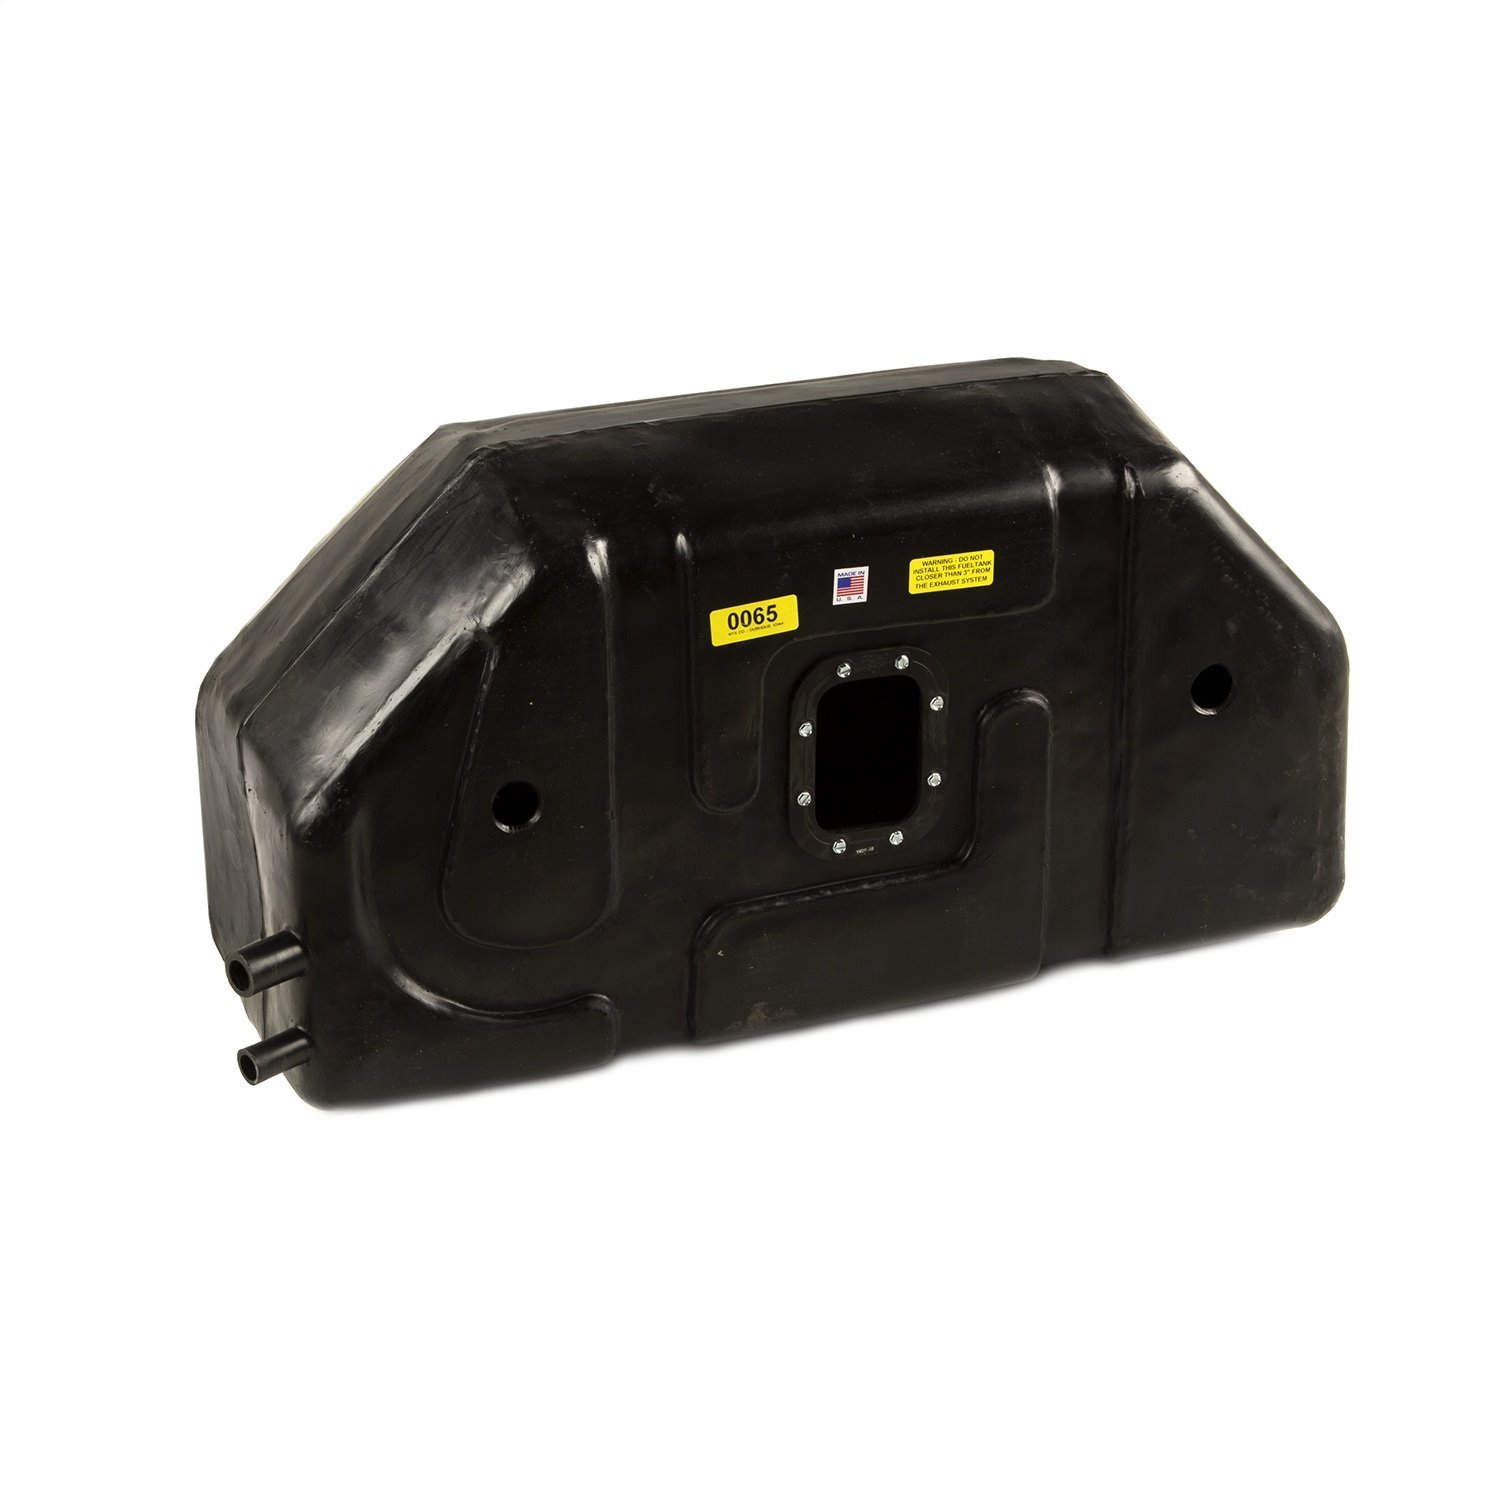 This 20 gallon polyethylene gas tank from Omix-ADA fits 1987-1995 Jeep Wranglers with a 2.5L 4.2L or 4.0L engine